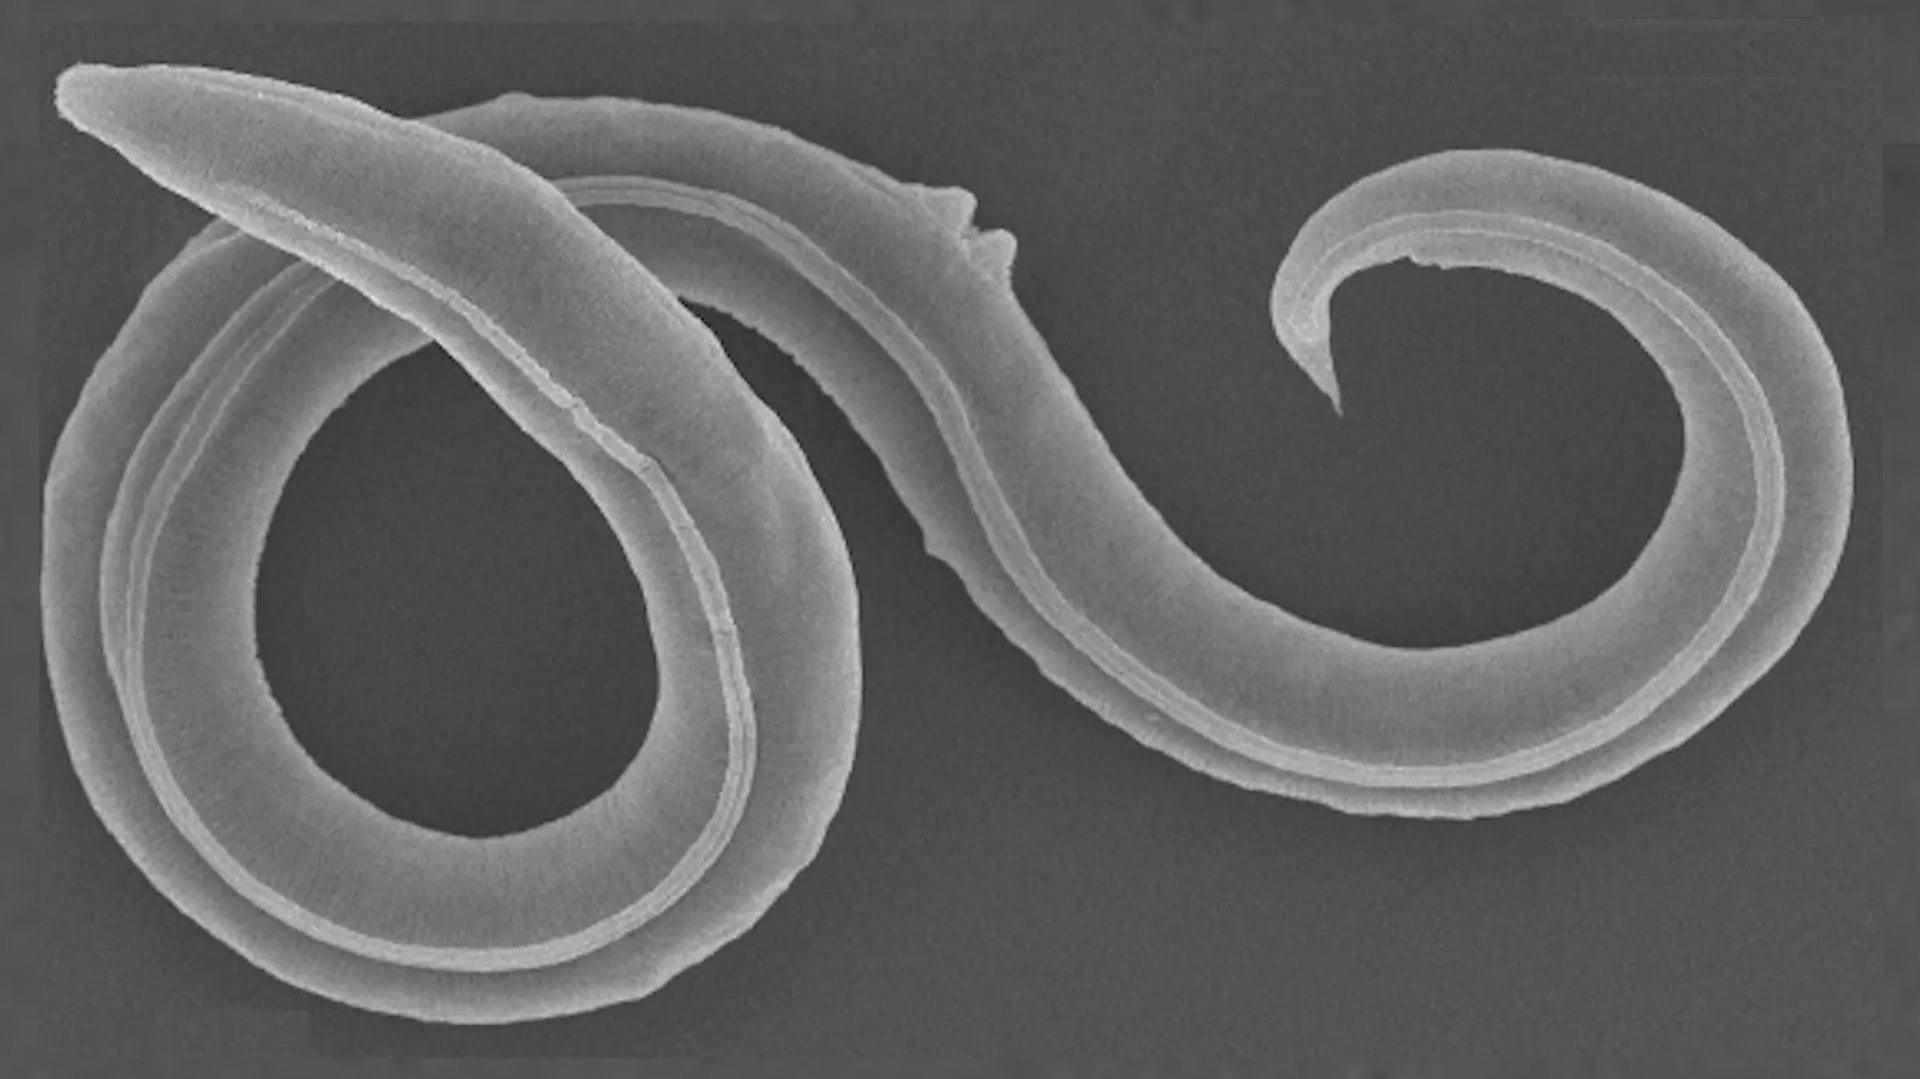 Ancient worms revived after 46,000 years